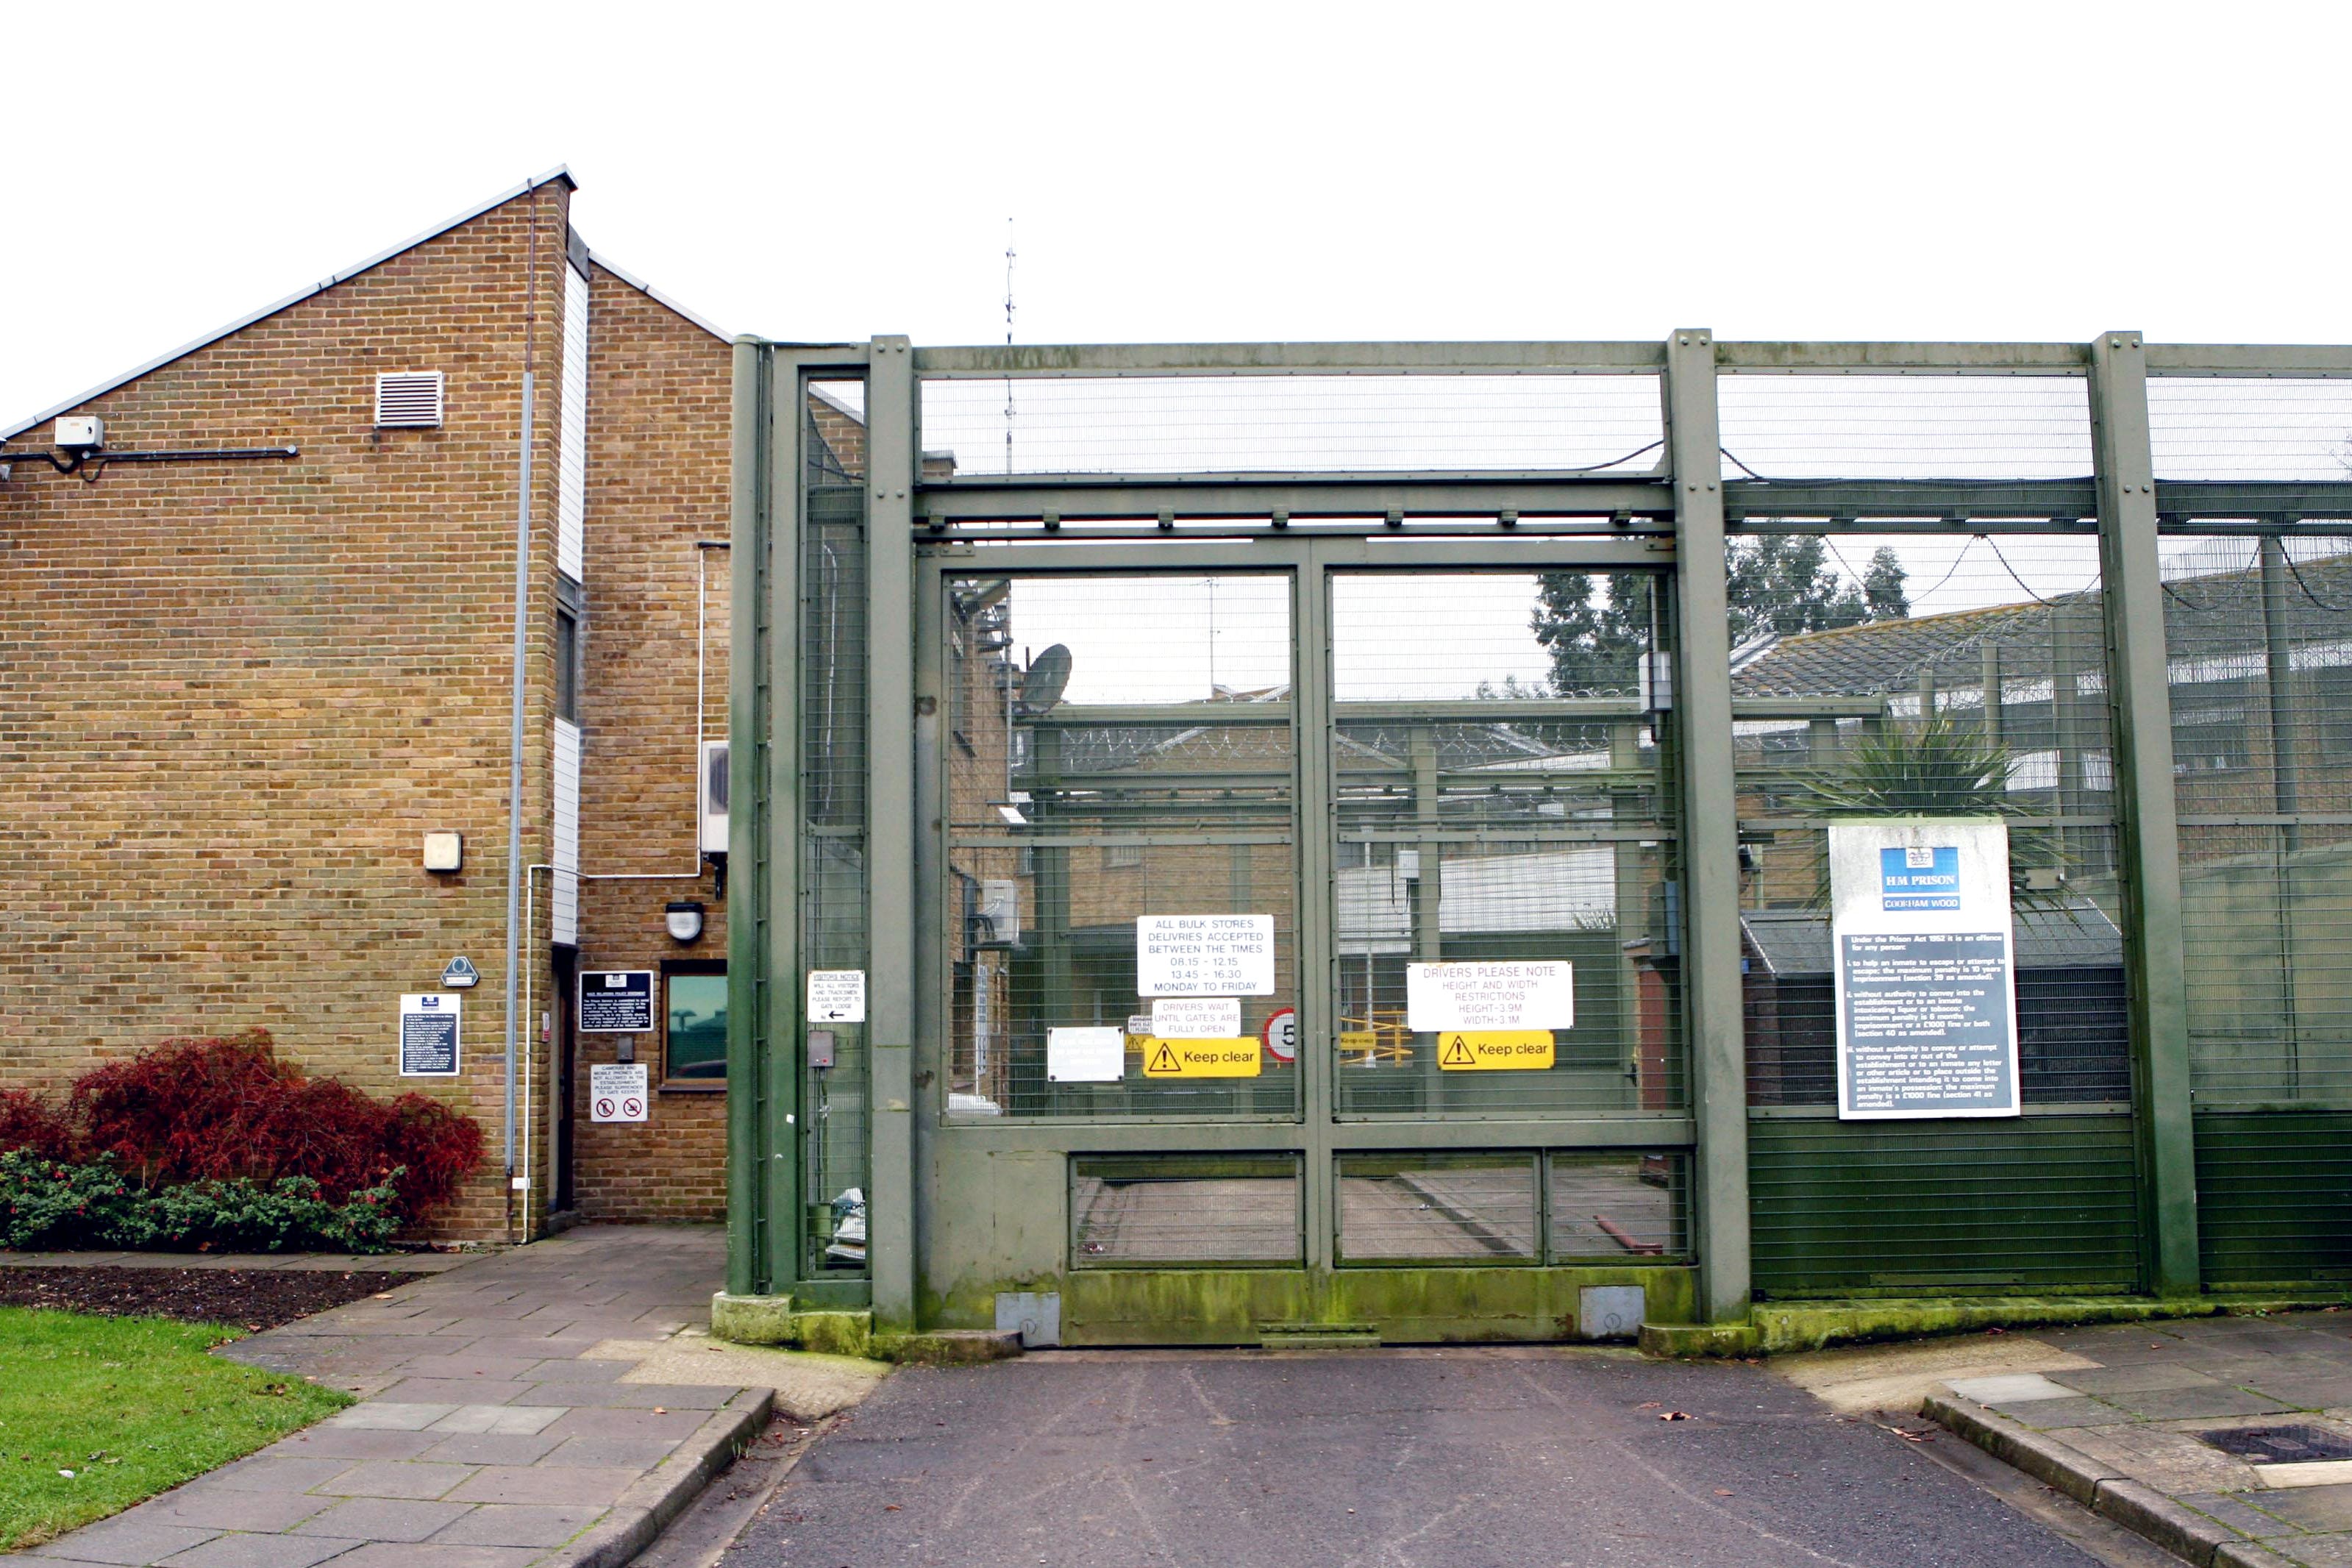 The entrance to HMP Cookham Wood in Rochester, Kent